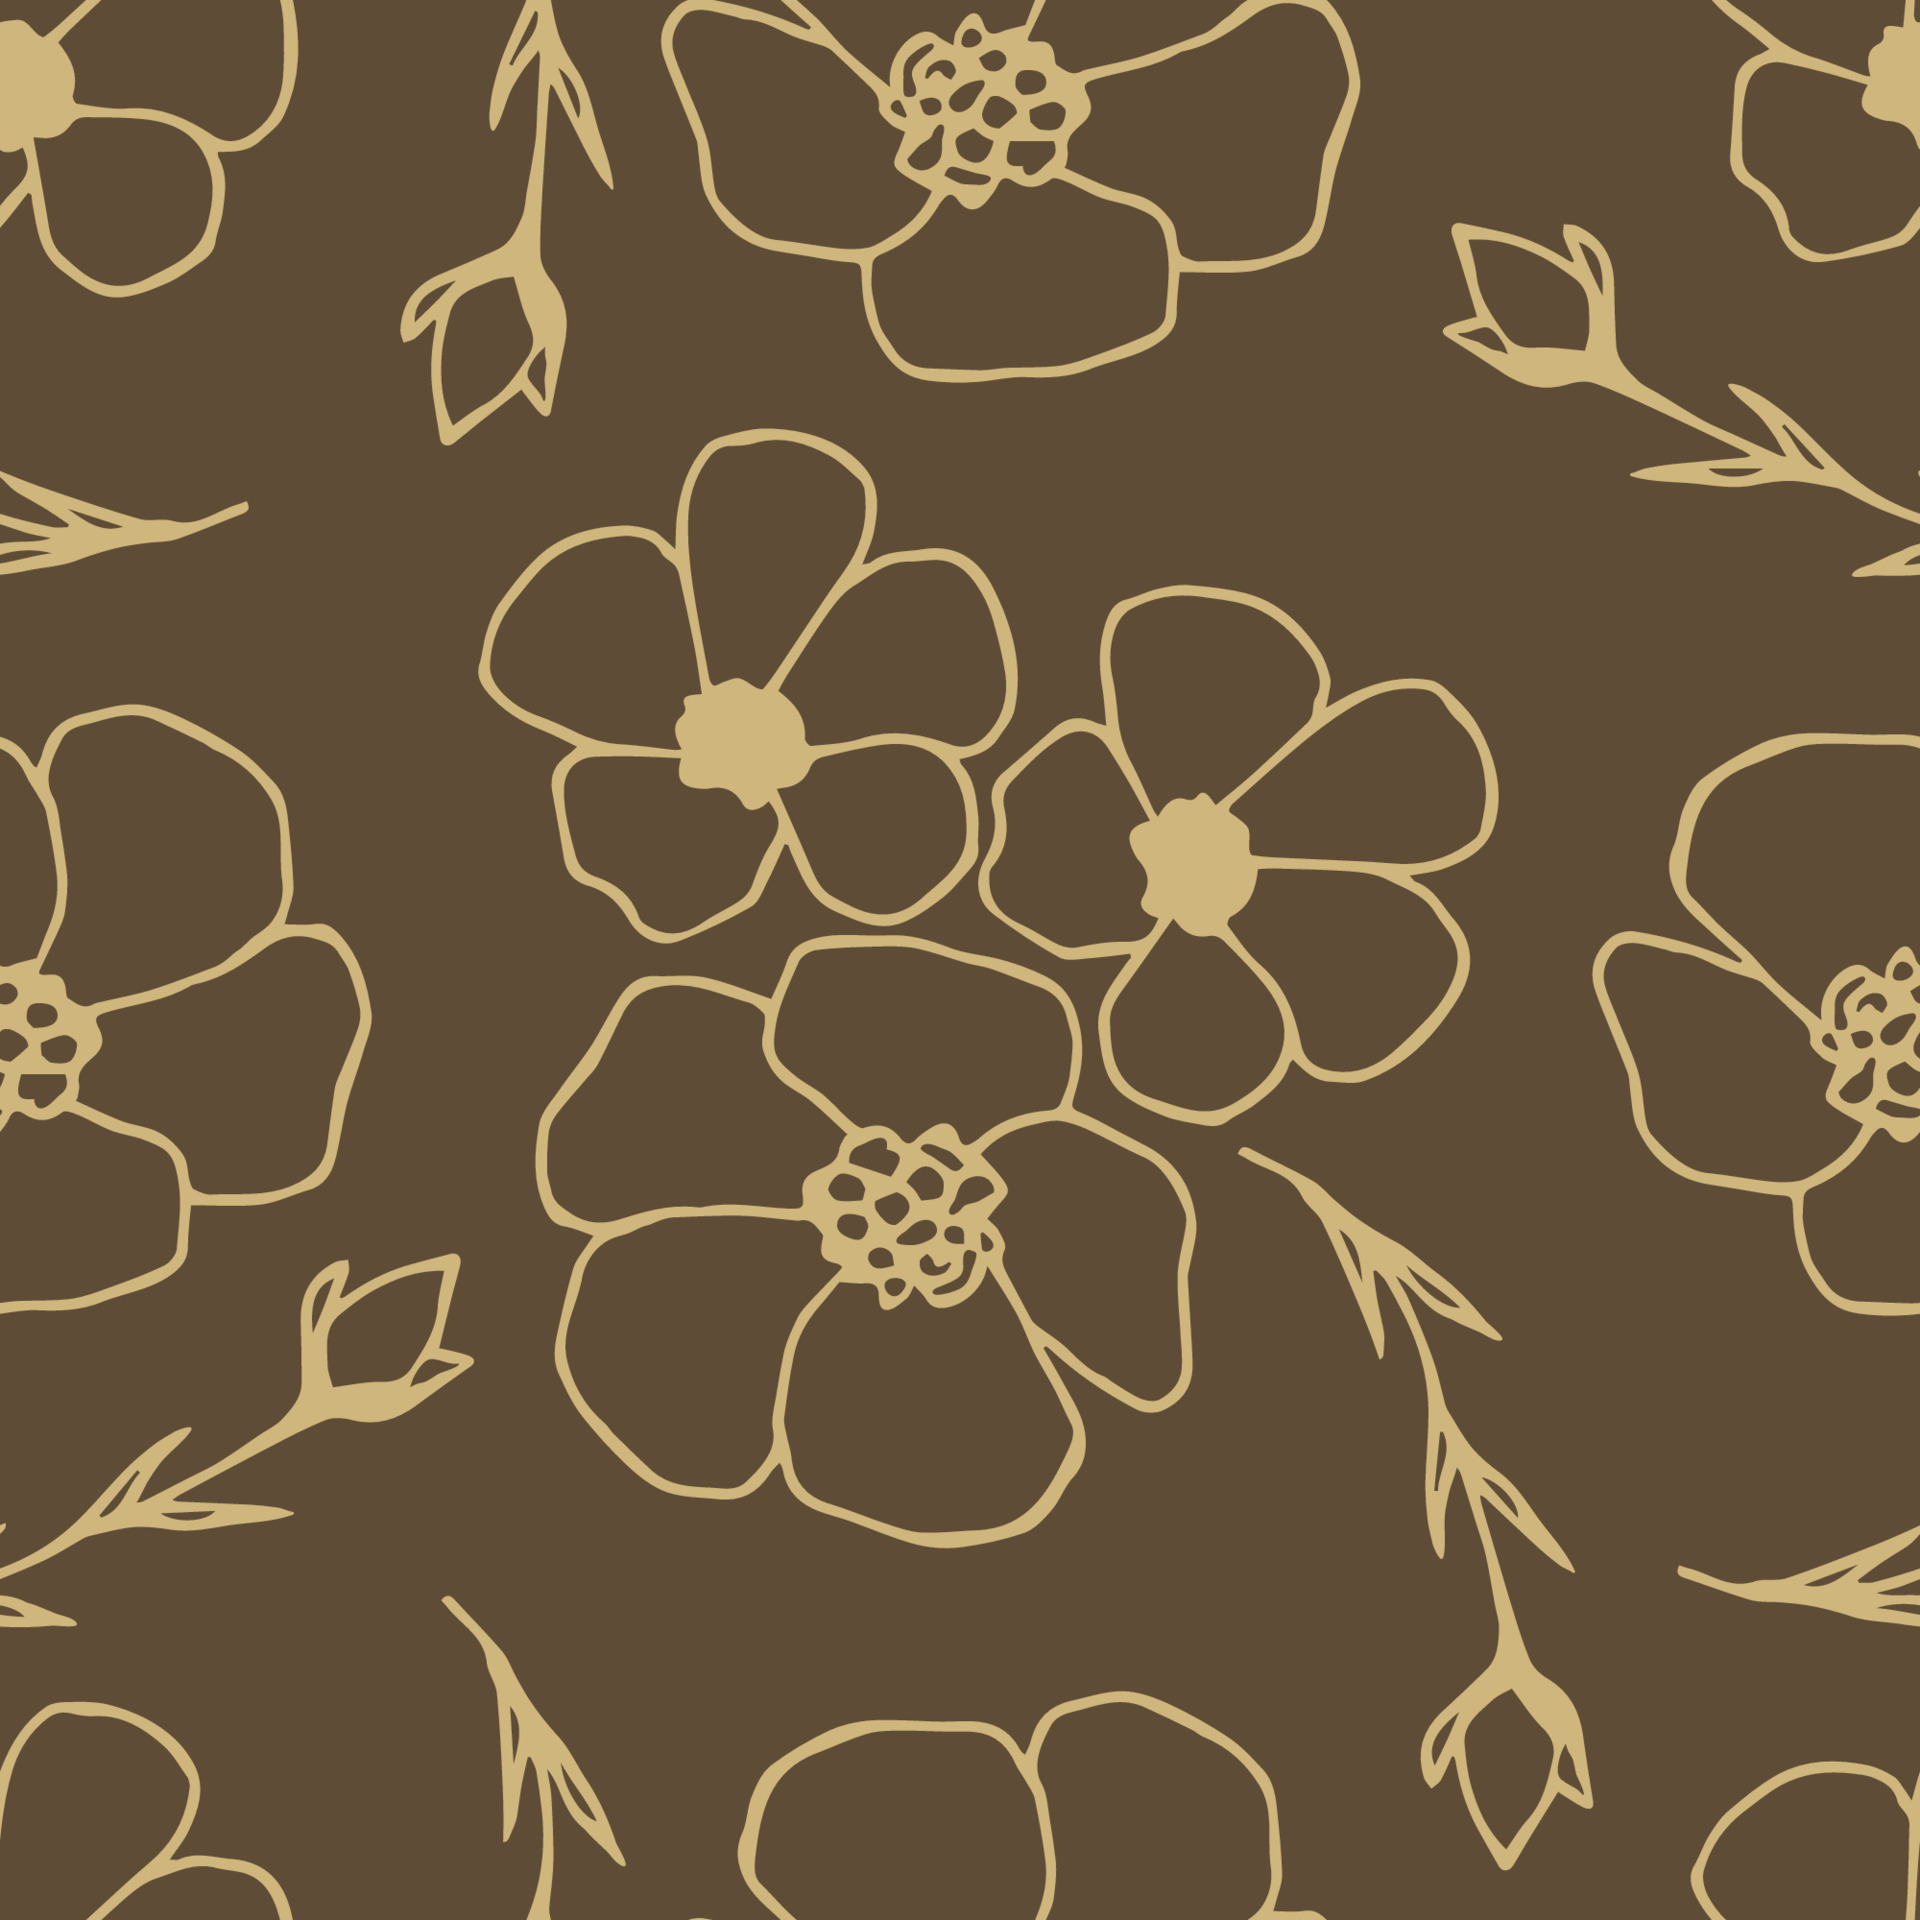 Light brown floral background Royalty Free Vector Image